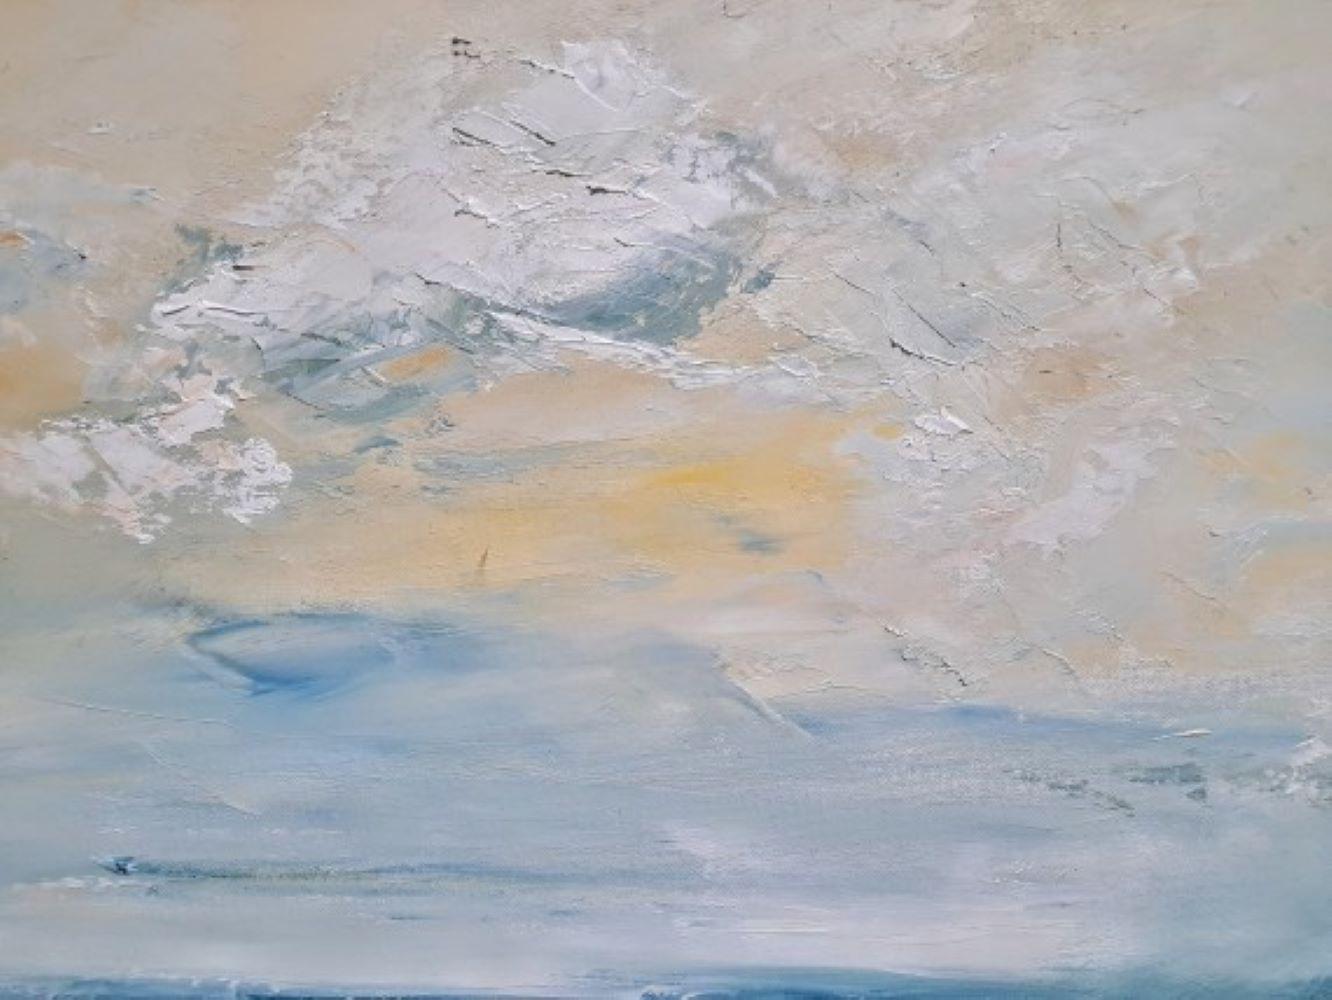 Passing Storm, Original seascape and landsacpe painting  - Painting by Georgie Dowling